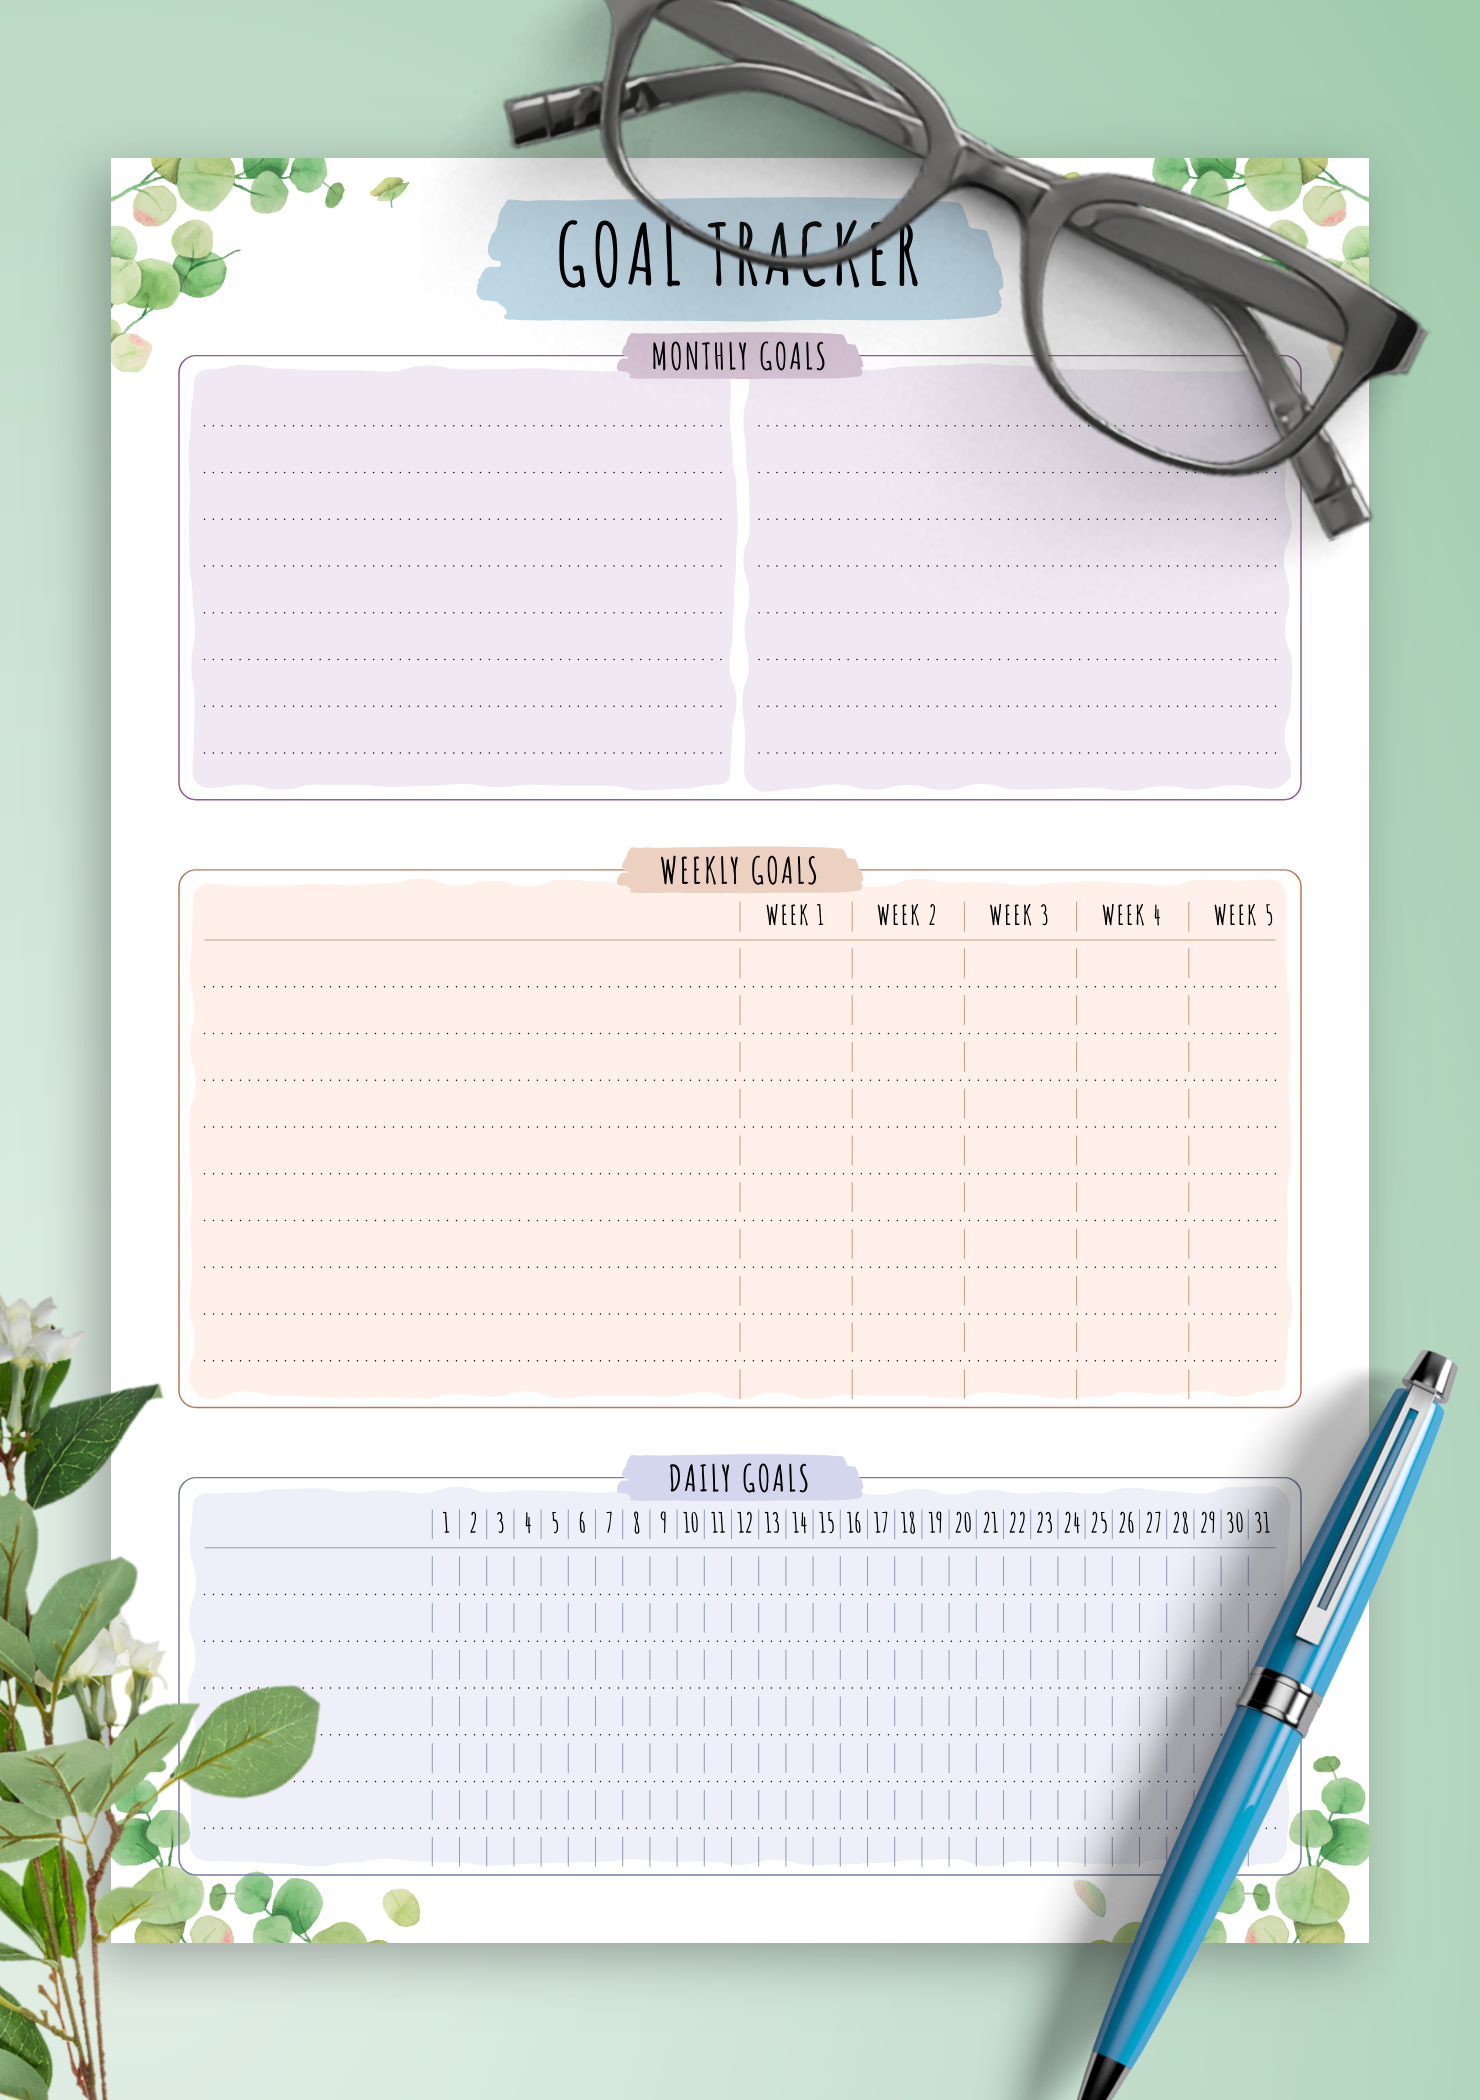 Monthly Goal Tracker Template from onplanners.com